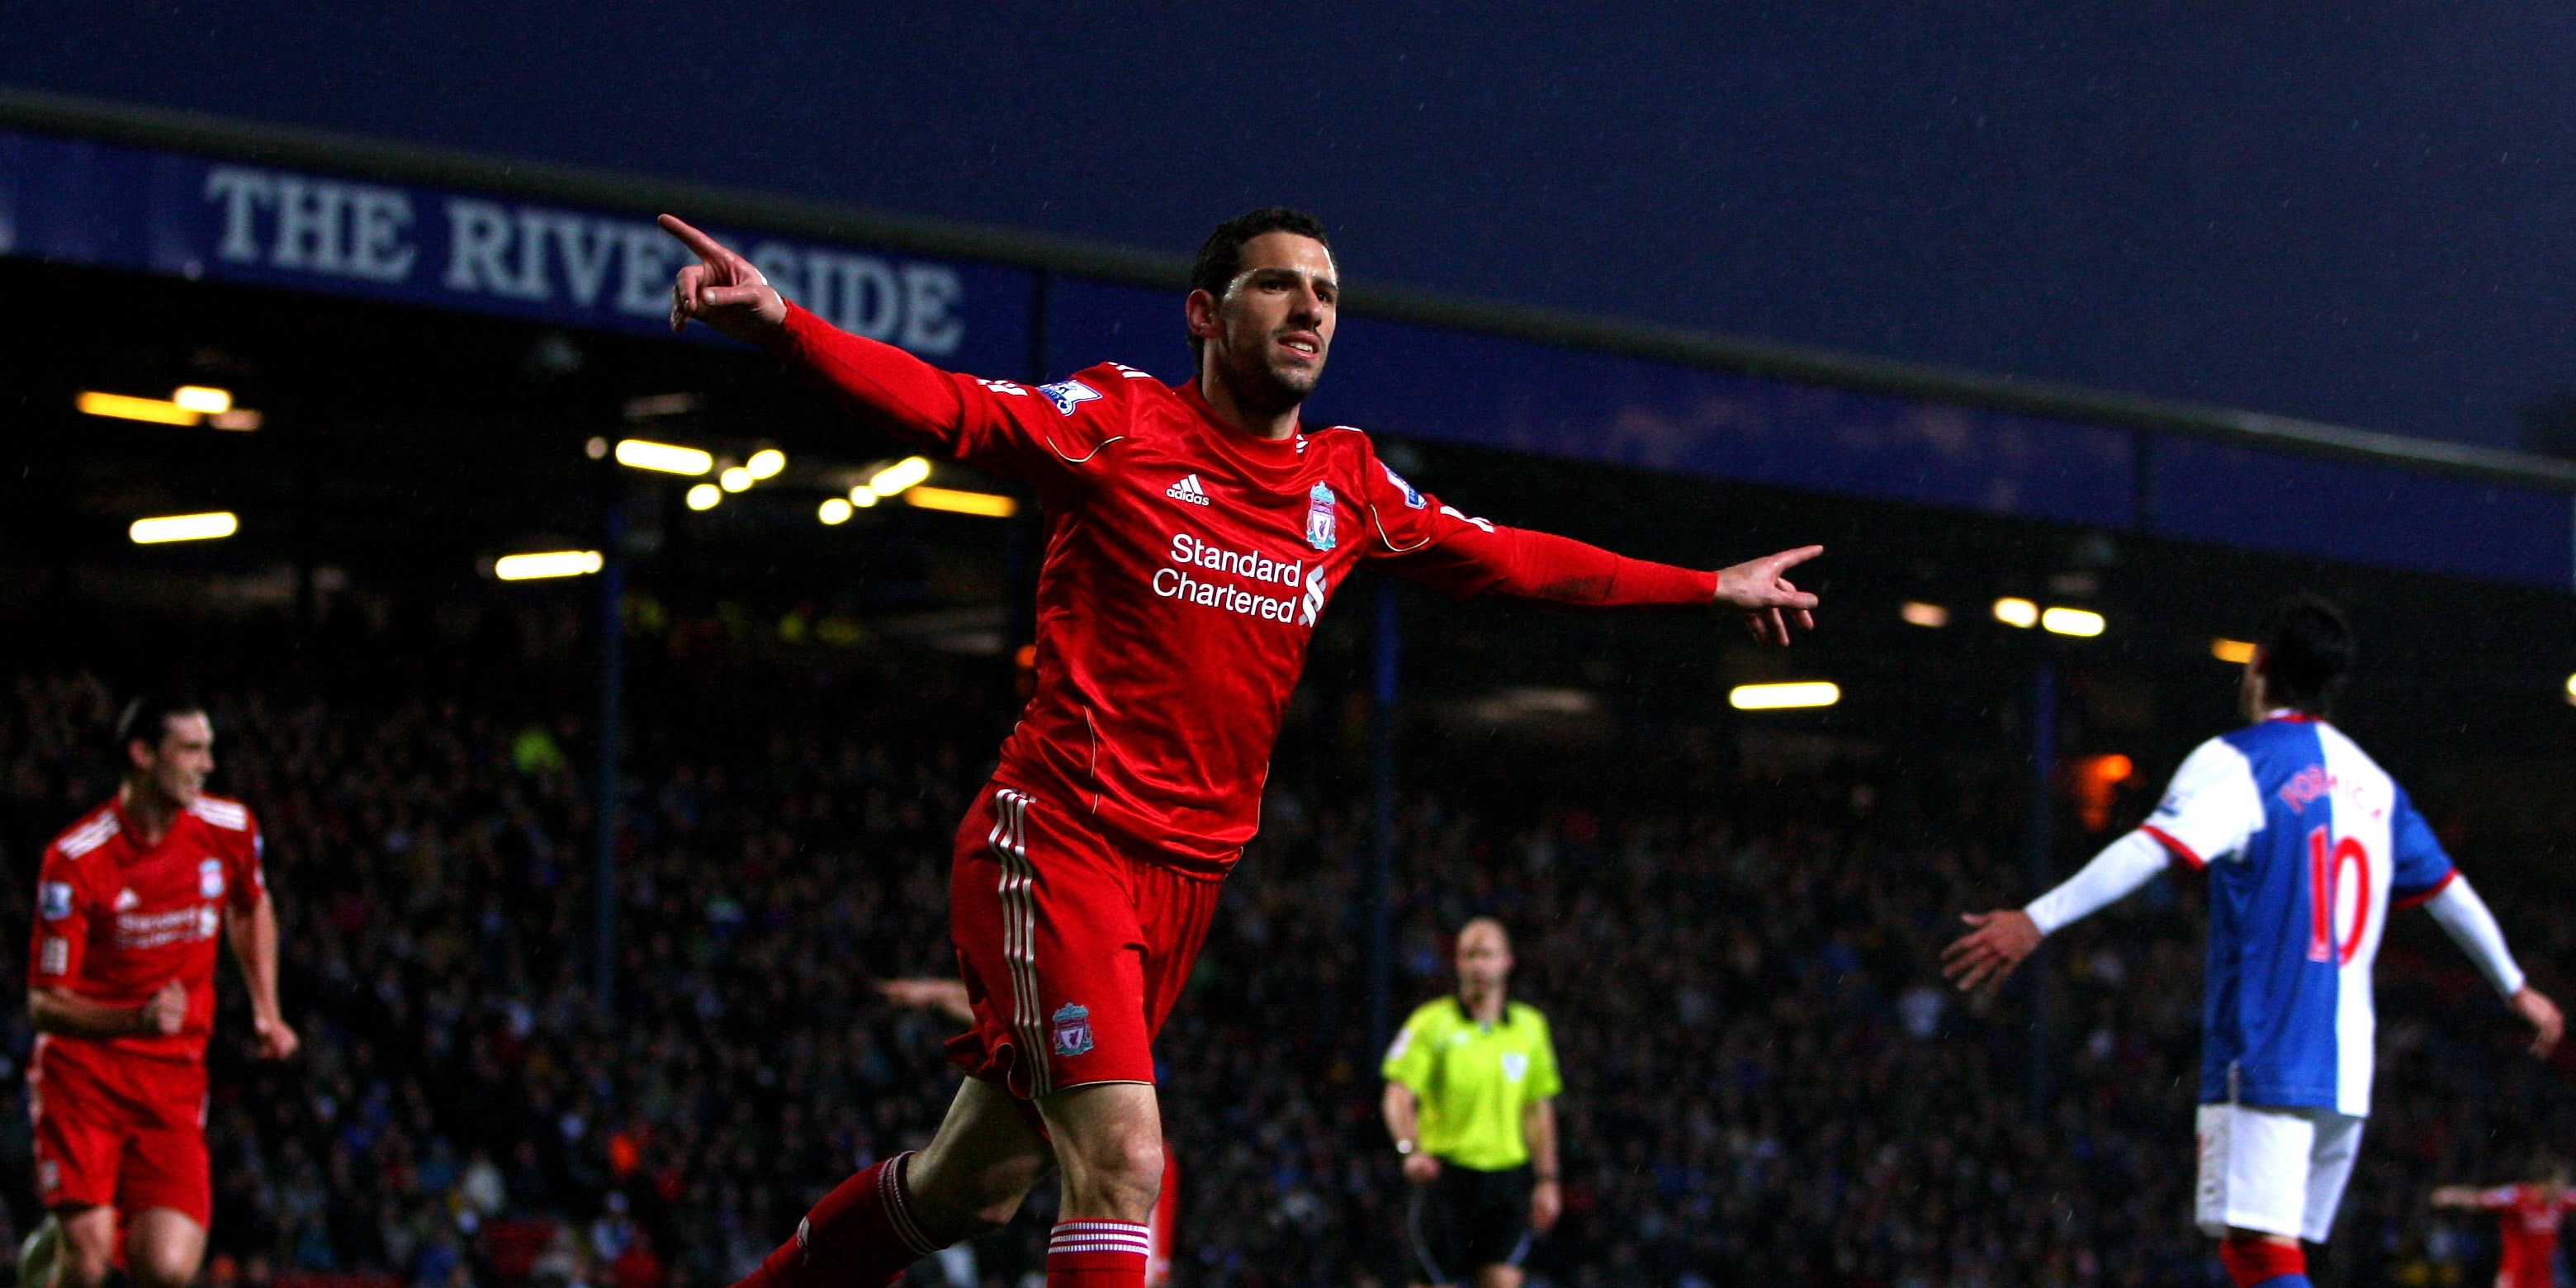 Ex-Anfield favourite Maxi Rodriguez who scored 17 goals for Liverpool announces retirement